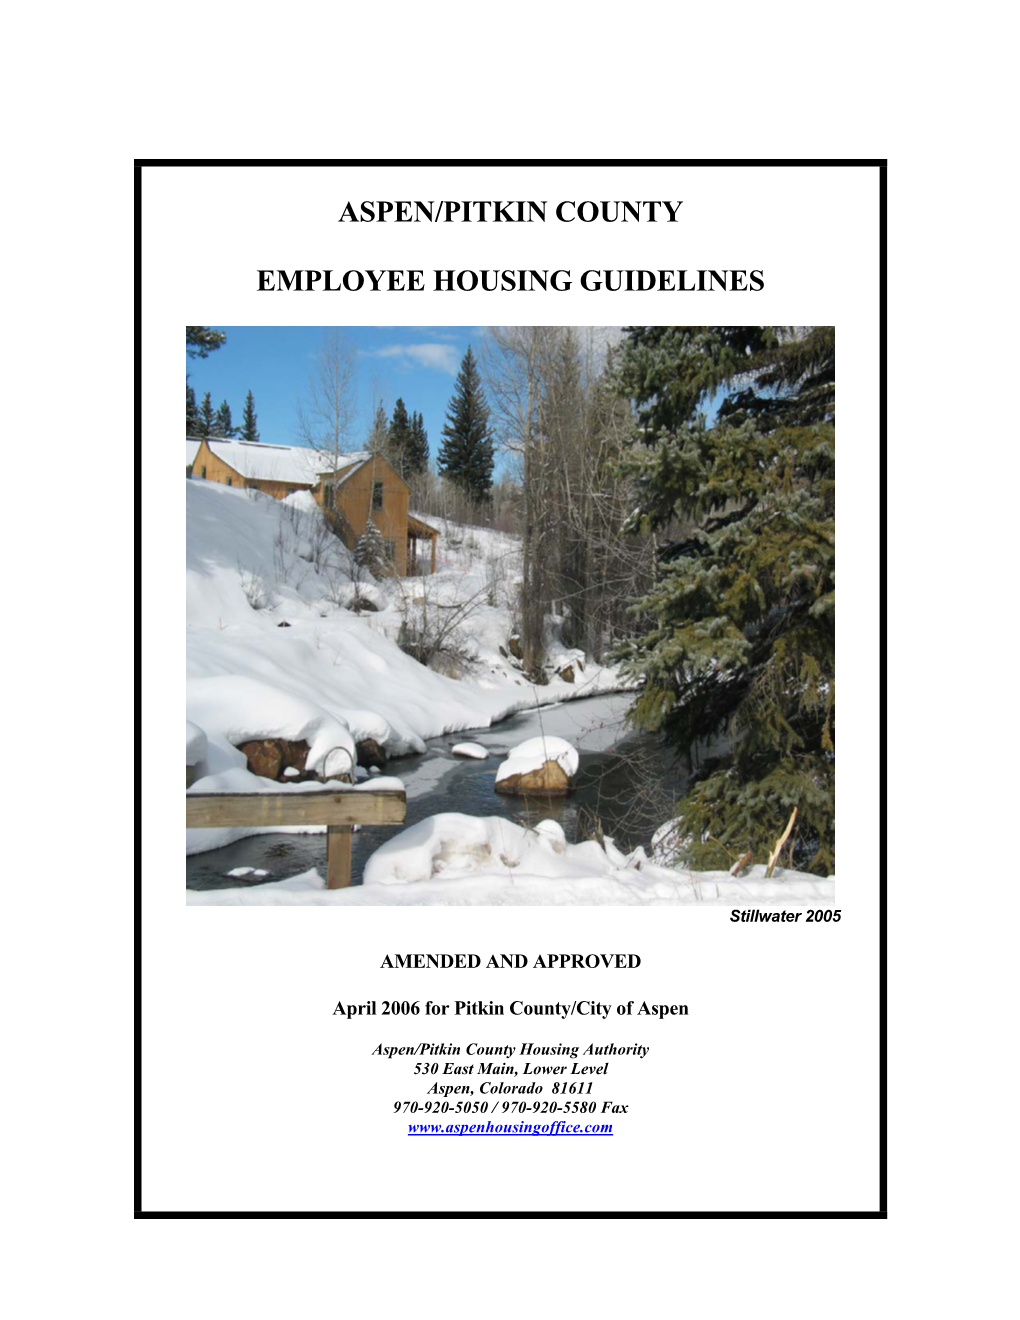 Aspen/Pitkin County Employee Housing Guidelines AMENDED 04/06 Page 1 of 72